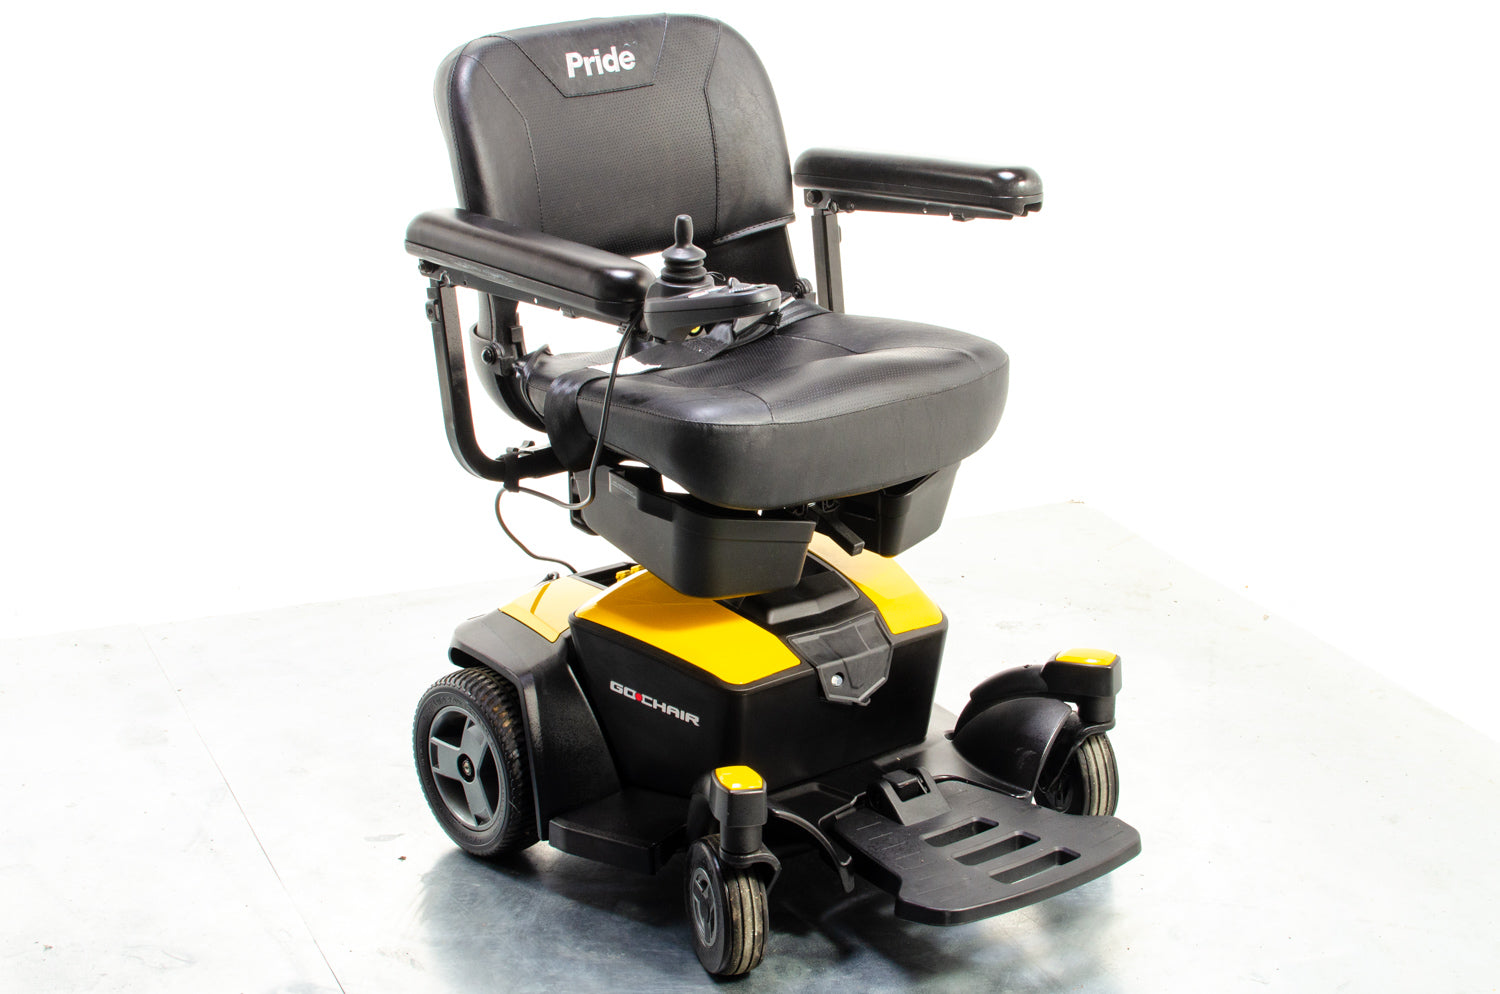 Pride Go Chair Small Compact Indoor Powerchair Electric Wheelchair Travel Transportable Yellow